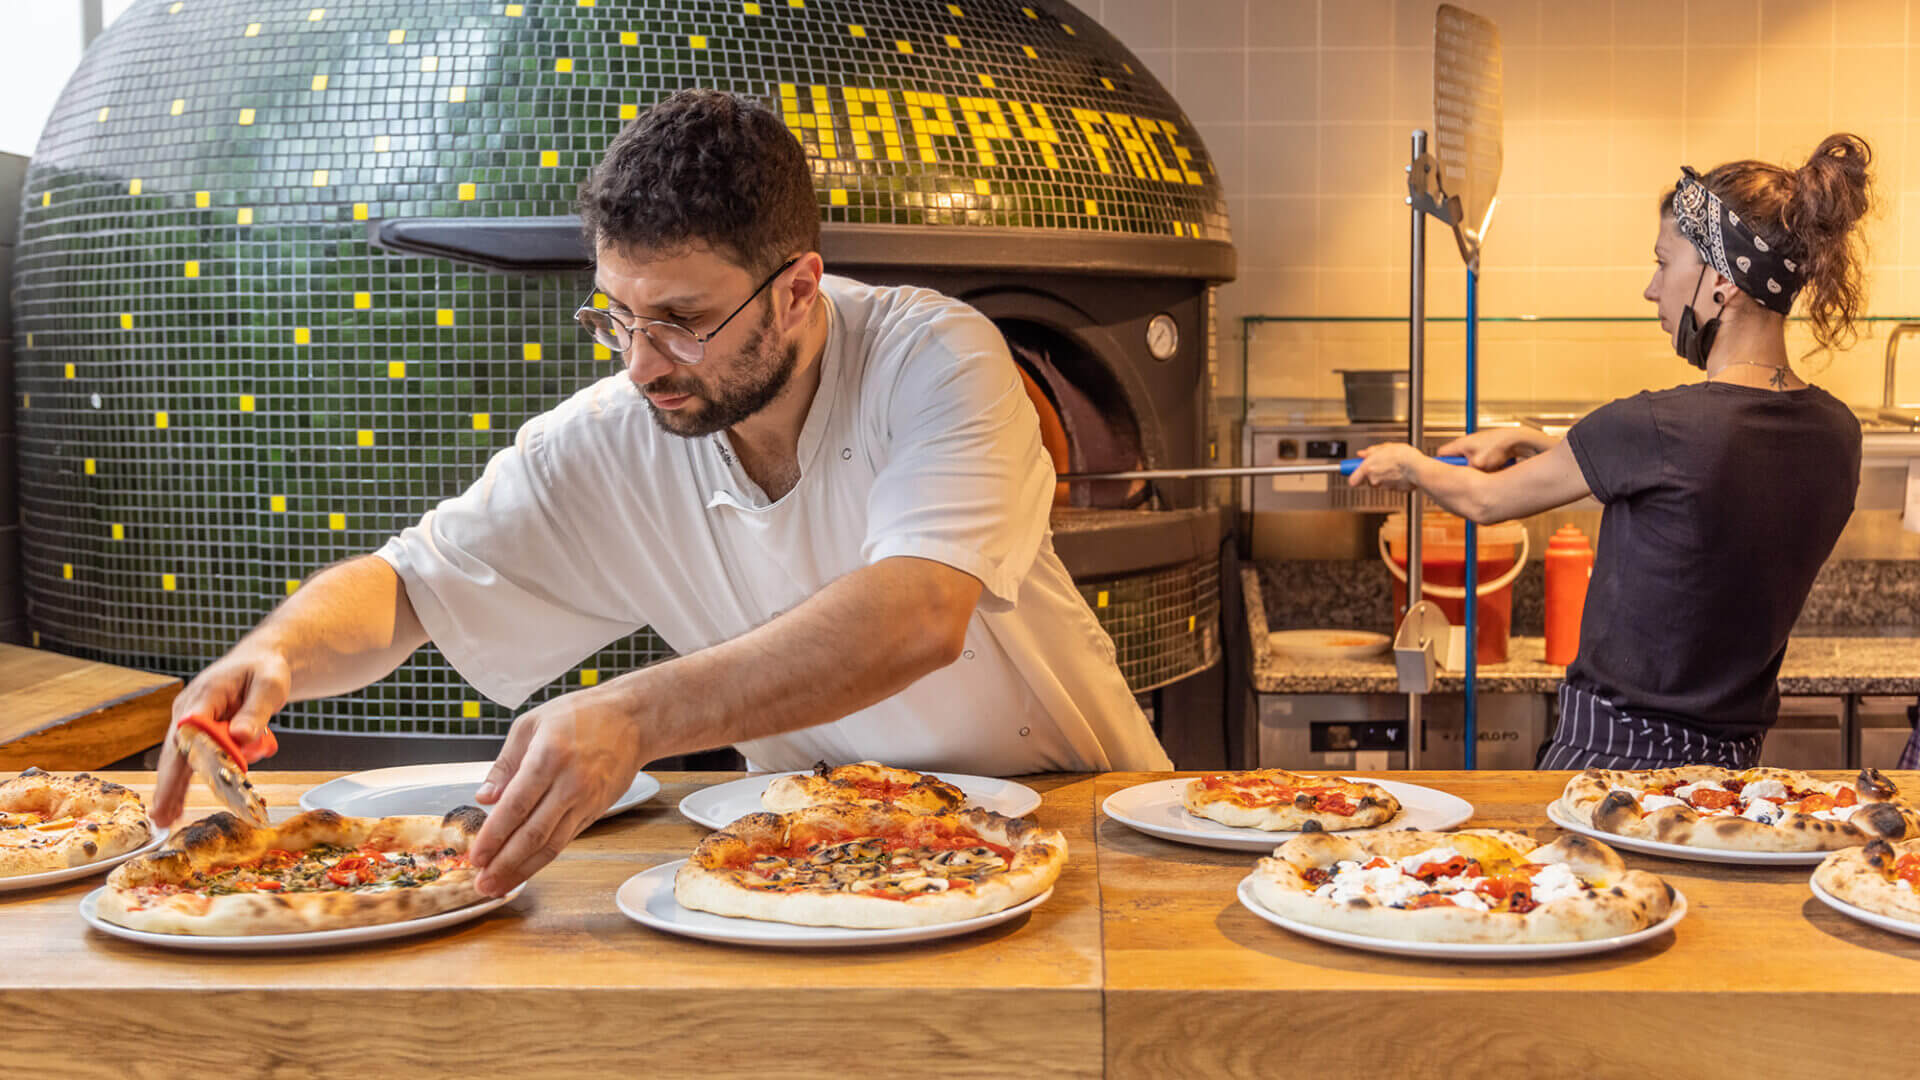 People making pizzas in front of an old-fashioned wood fired oven at Happy Face. There are eight pizzas visible on a wooden counter.